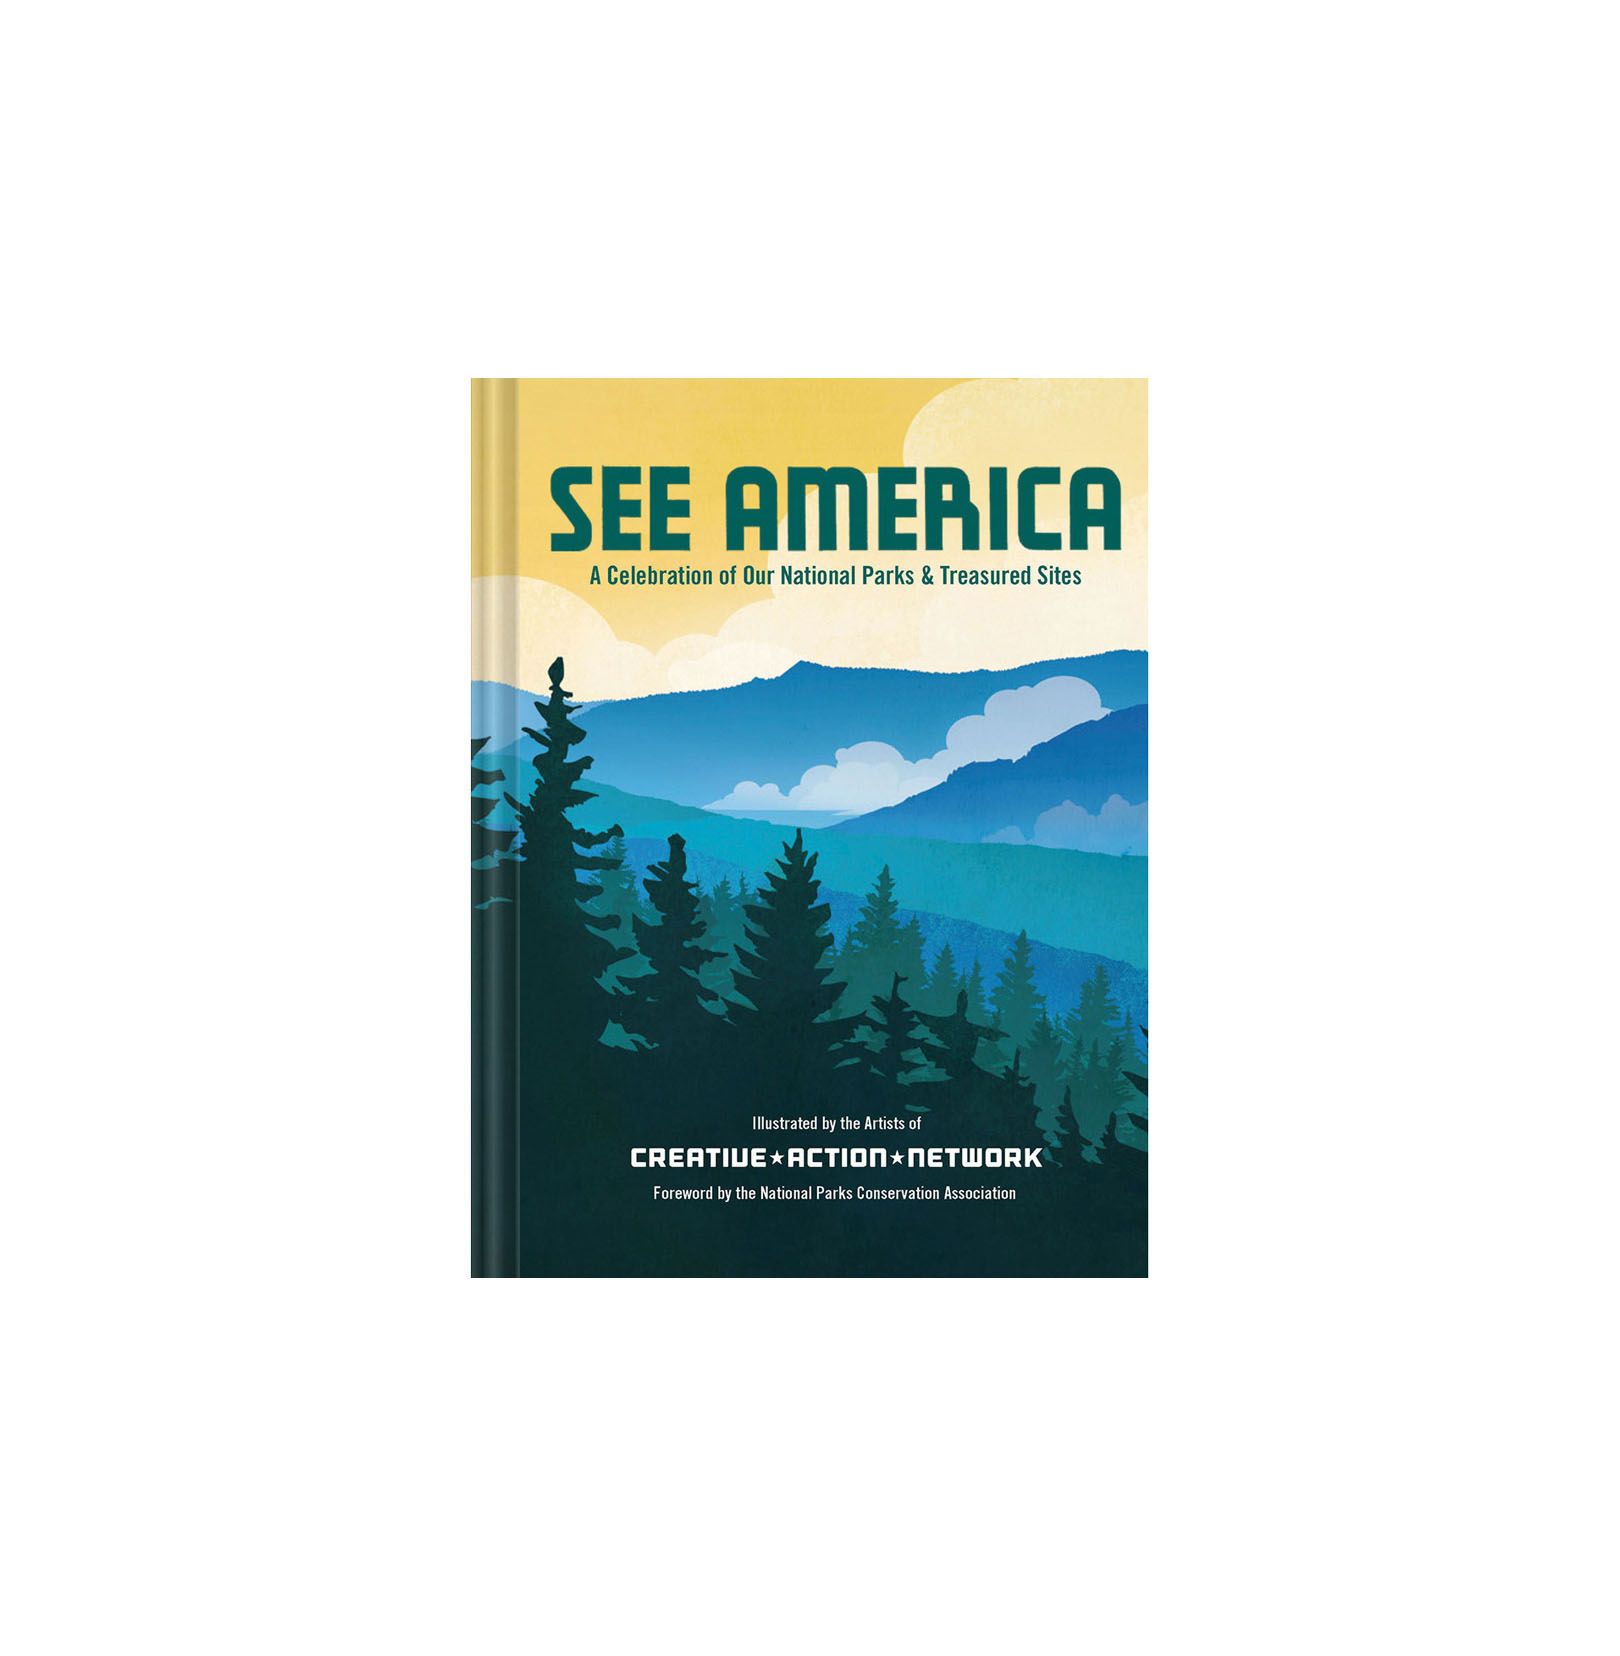 See America : A Celebration of Our National Parks & Treasured Sites, by the Creative Action Network